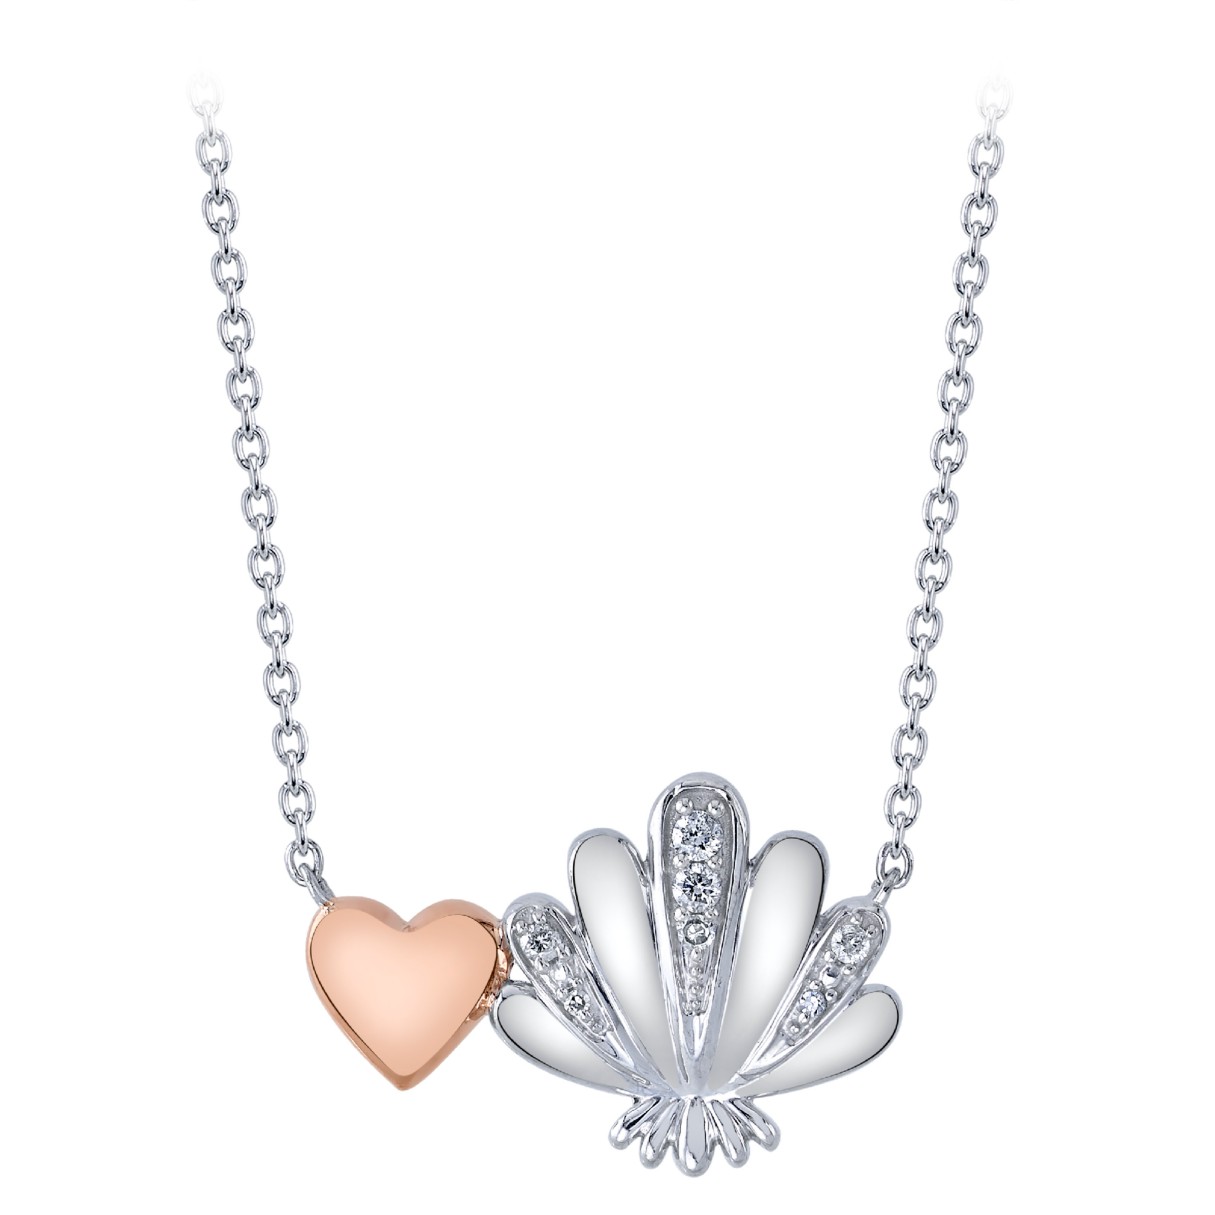 The Little Mermaid Heart and Shell Diamond Necklace